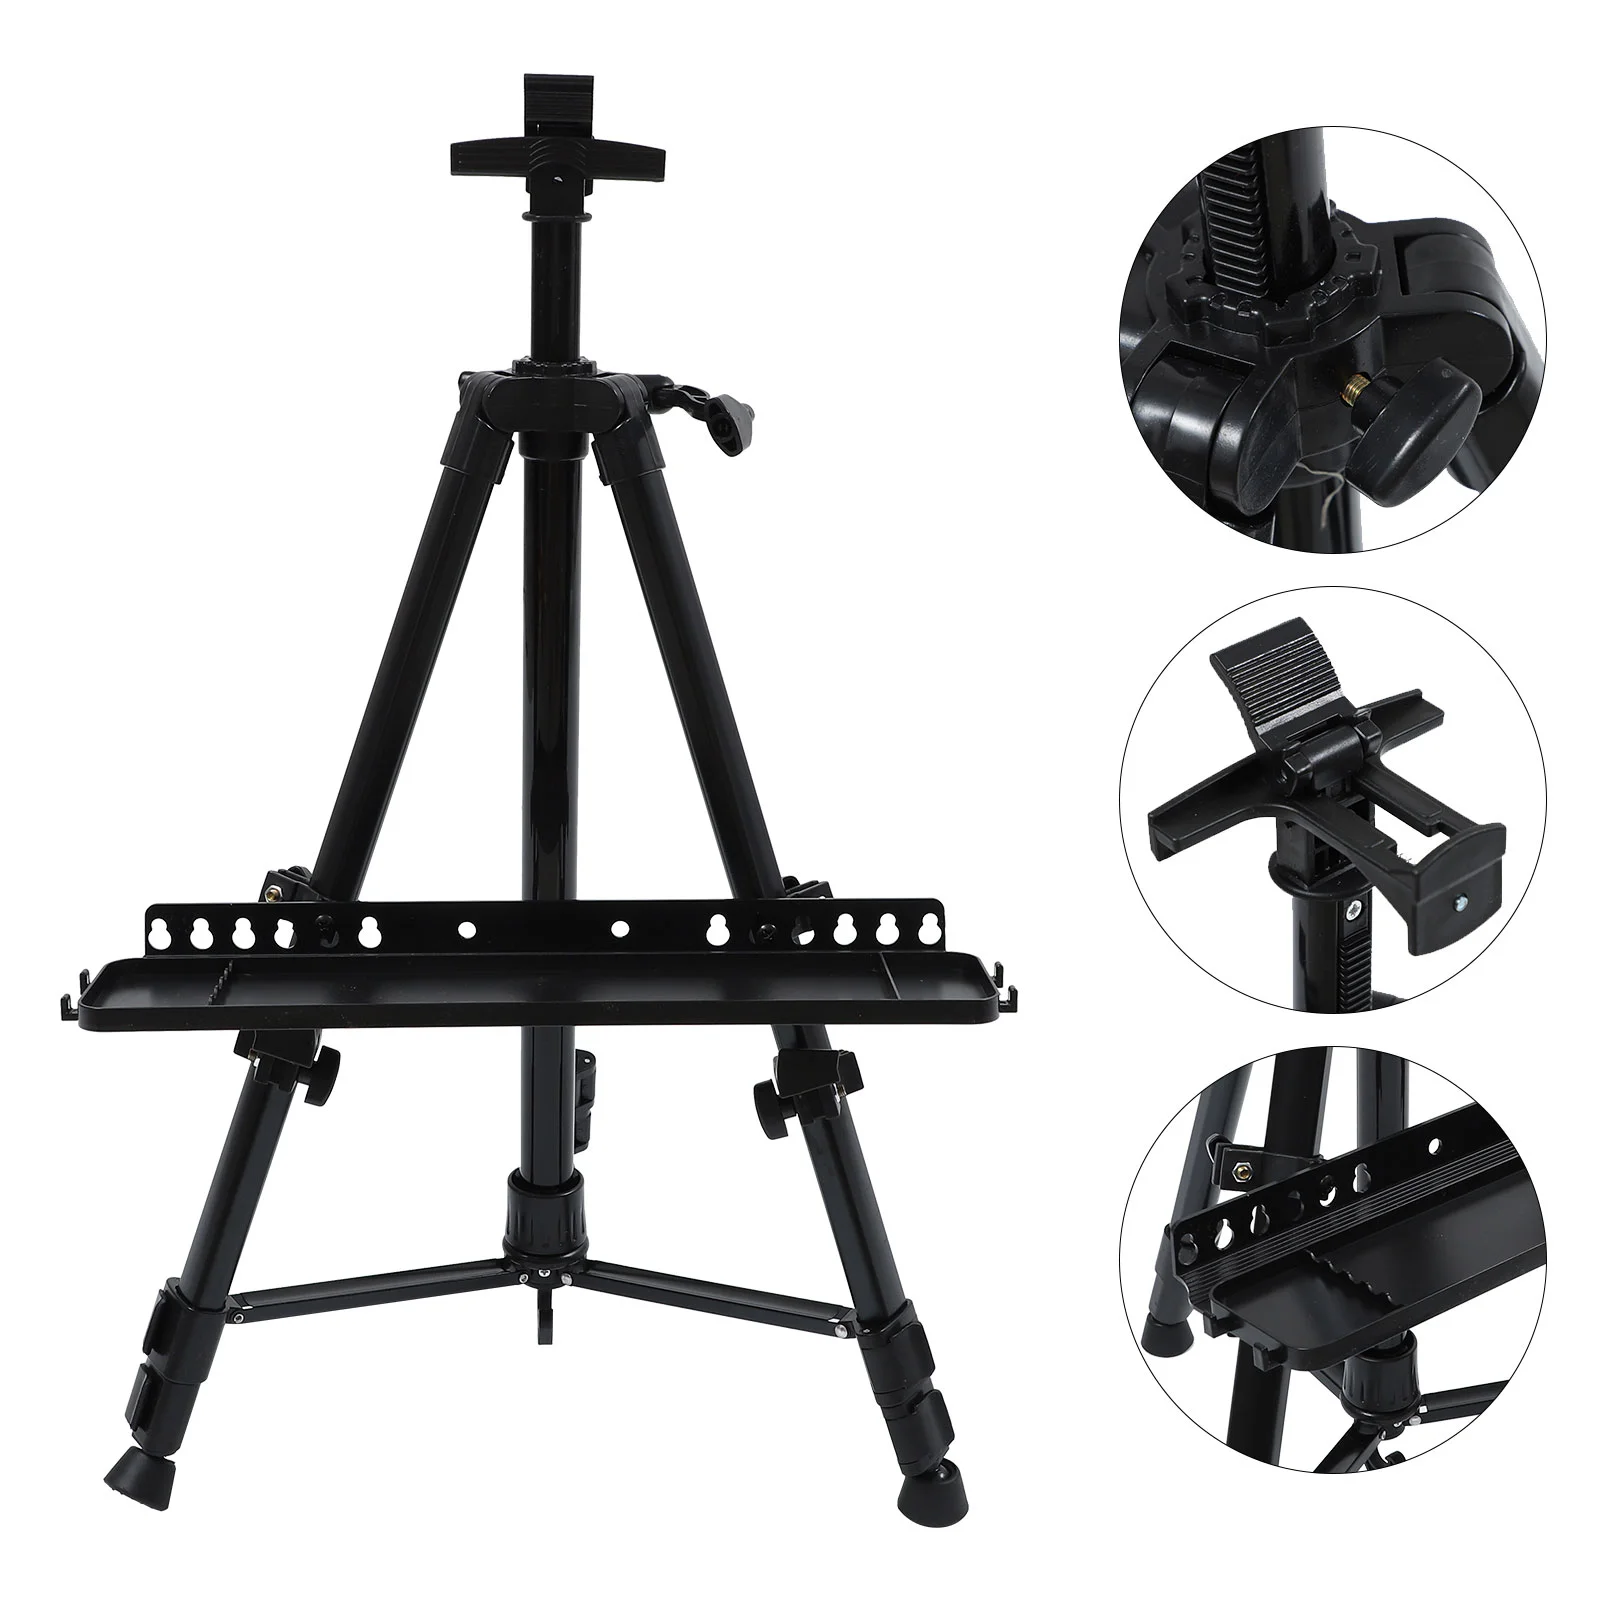  Sketch Board Holder Painting Easel Stand Aluminum Easel Stand  Floor Easel Stand Artist Tripod Stand Tripod Art Stand Metal Stand Fall to  The Ground Aluminum Alloy Display Rack : Office Products